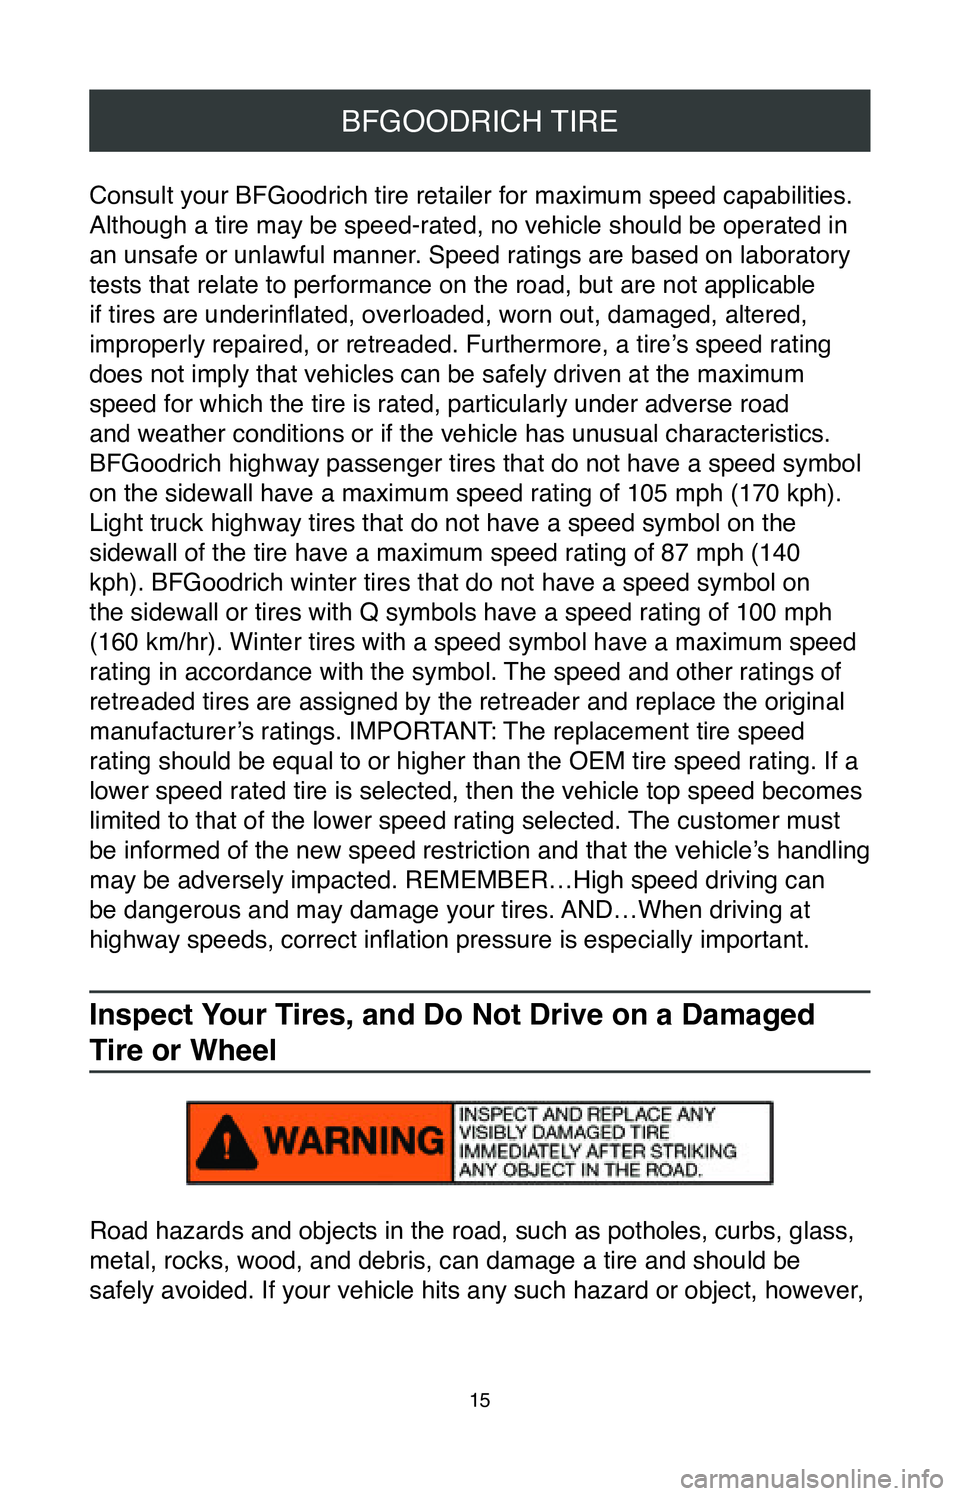 TOYOTA CAMRY 2020  Warranties & Maintenance Guides (in English) 15
BFGOODRICH TIRE
Consult your BFGoodrich tire retailer for maximum speed capabilities. 
Although a tire may be speed-rated, no vehicle should be operated in 
an unsafe or unlawful manner. Speed rati